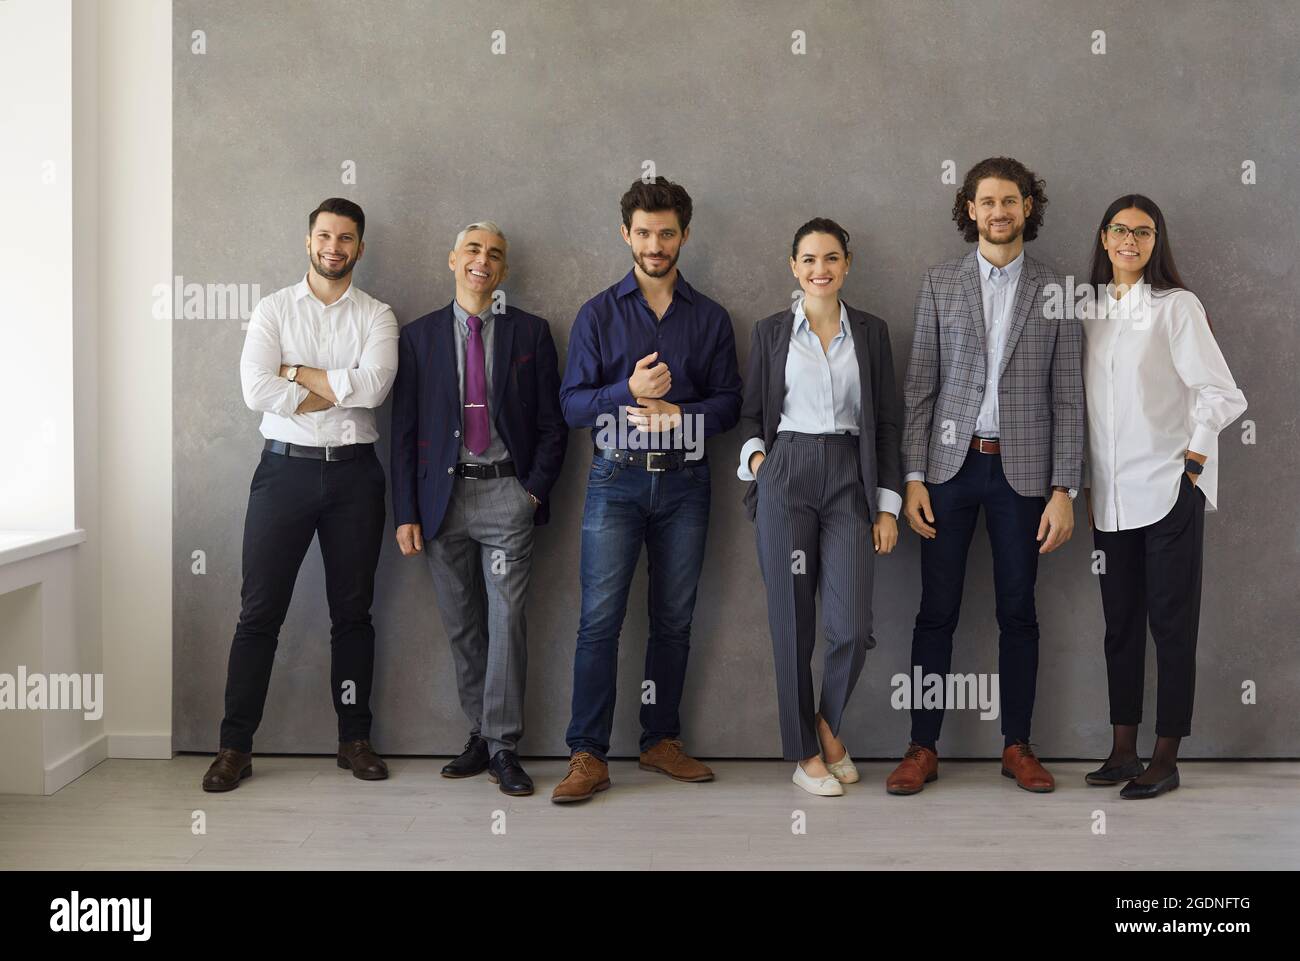 Group portrait of happy successful business professionals standing in office together Stock Photo